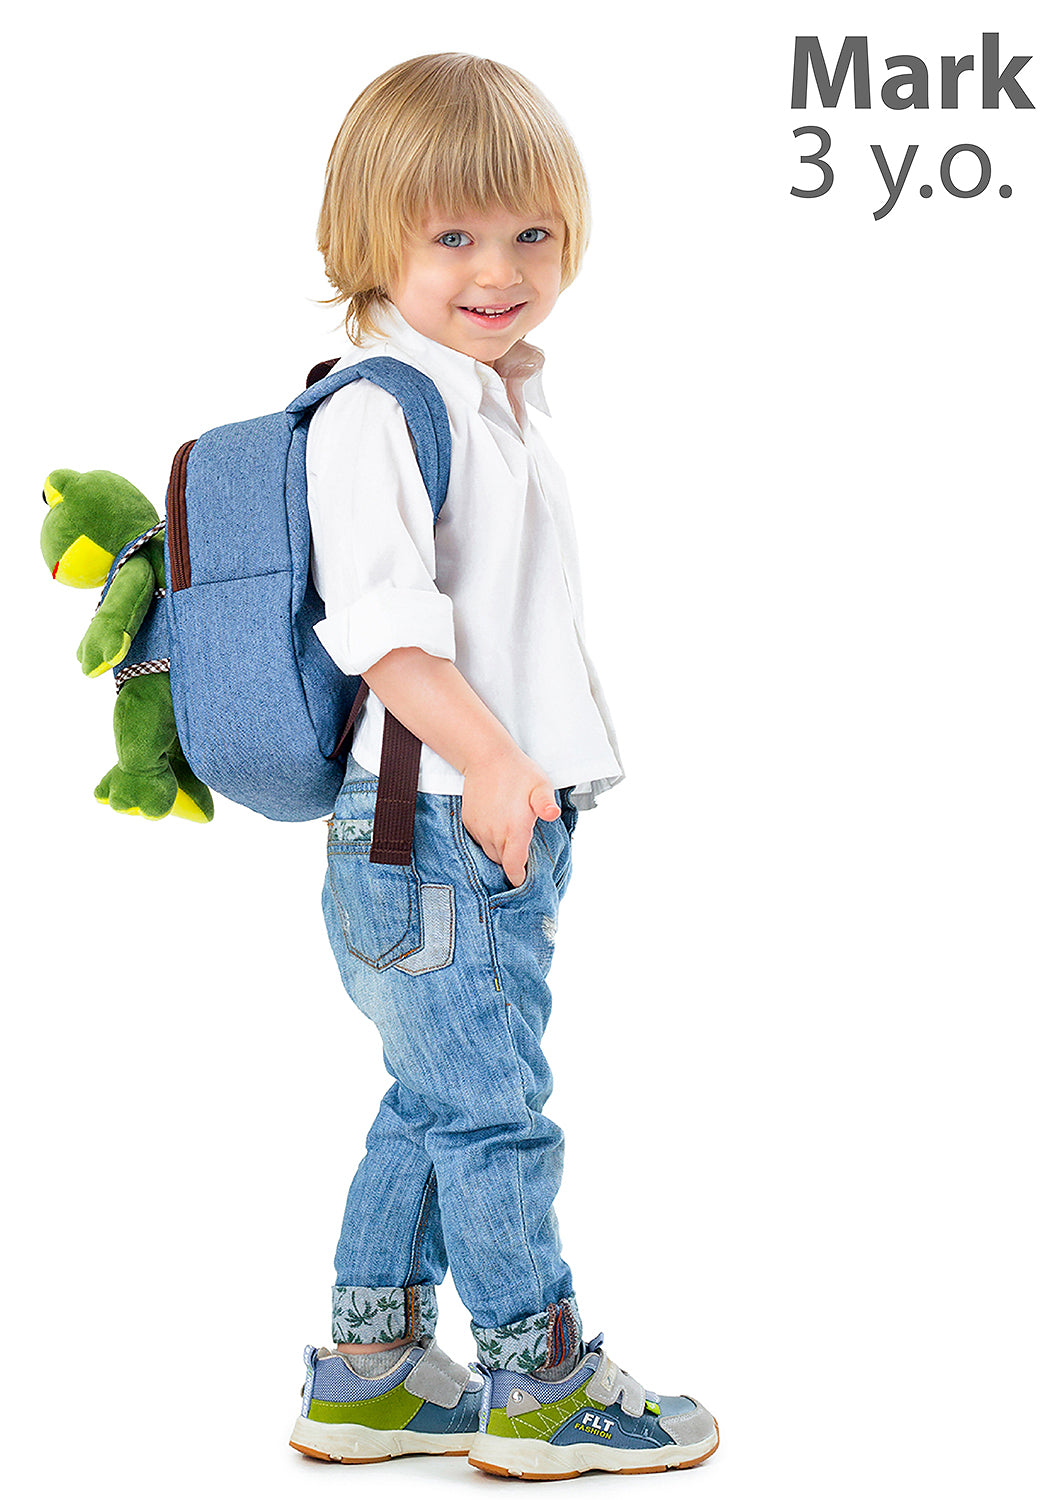 Toddler Backpack with Plush Frog Toy — Small